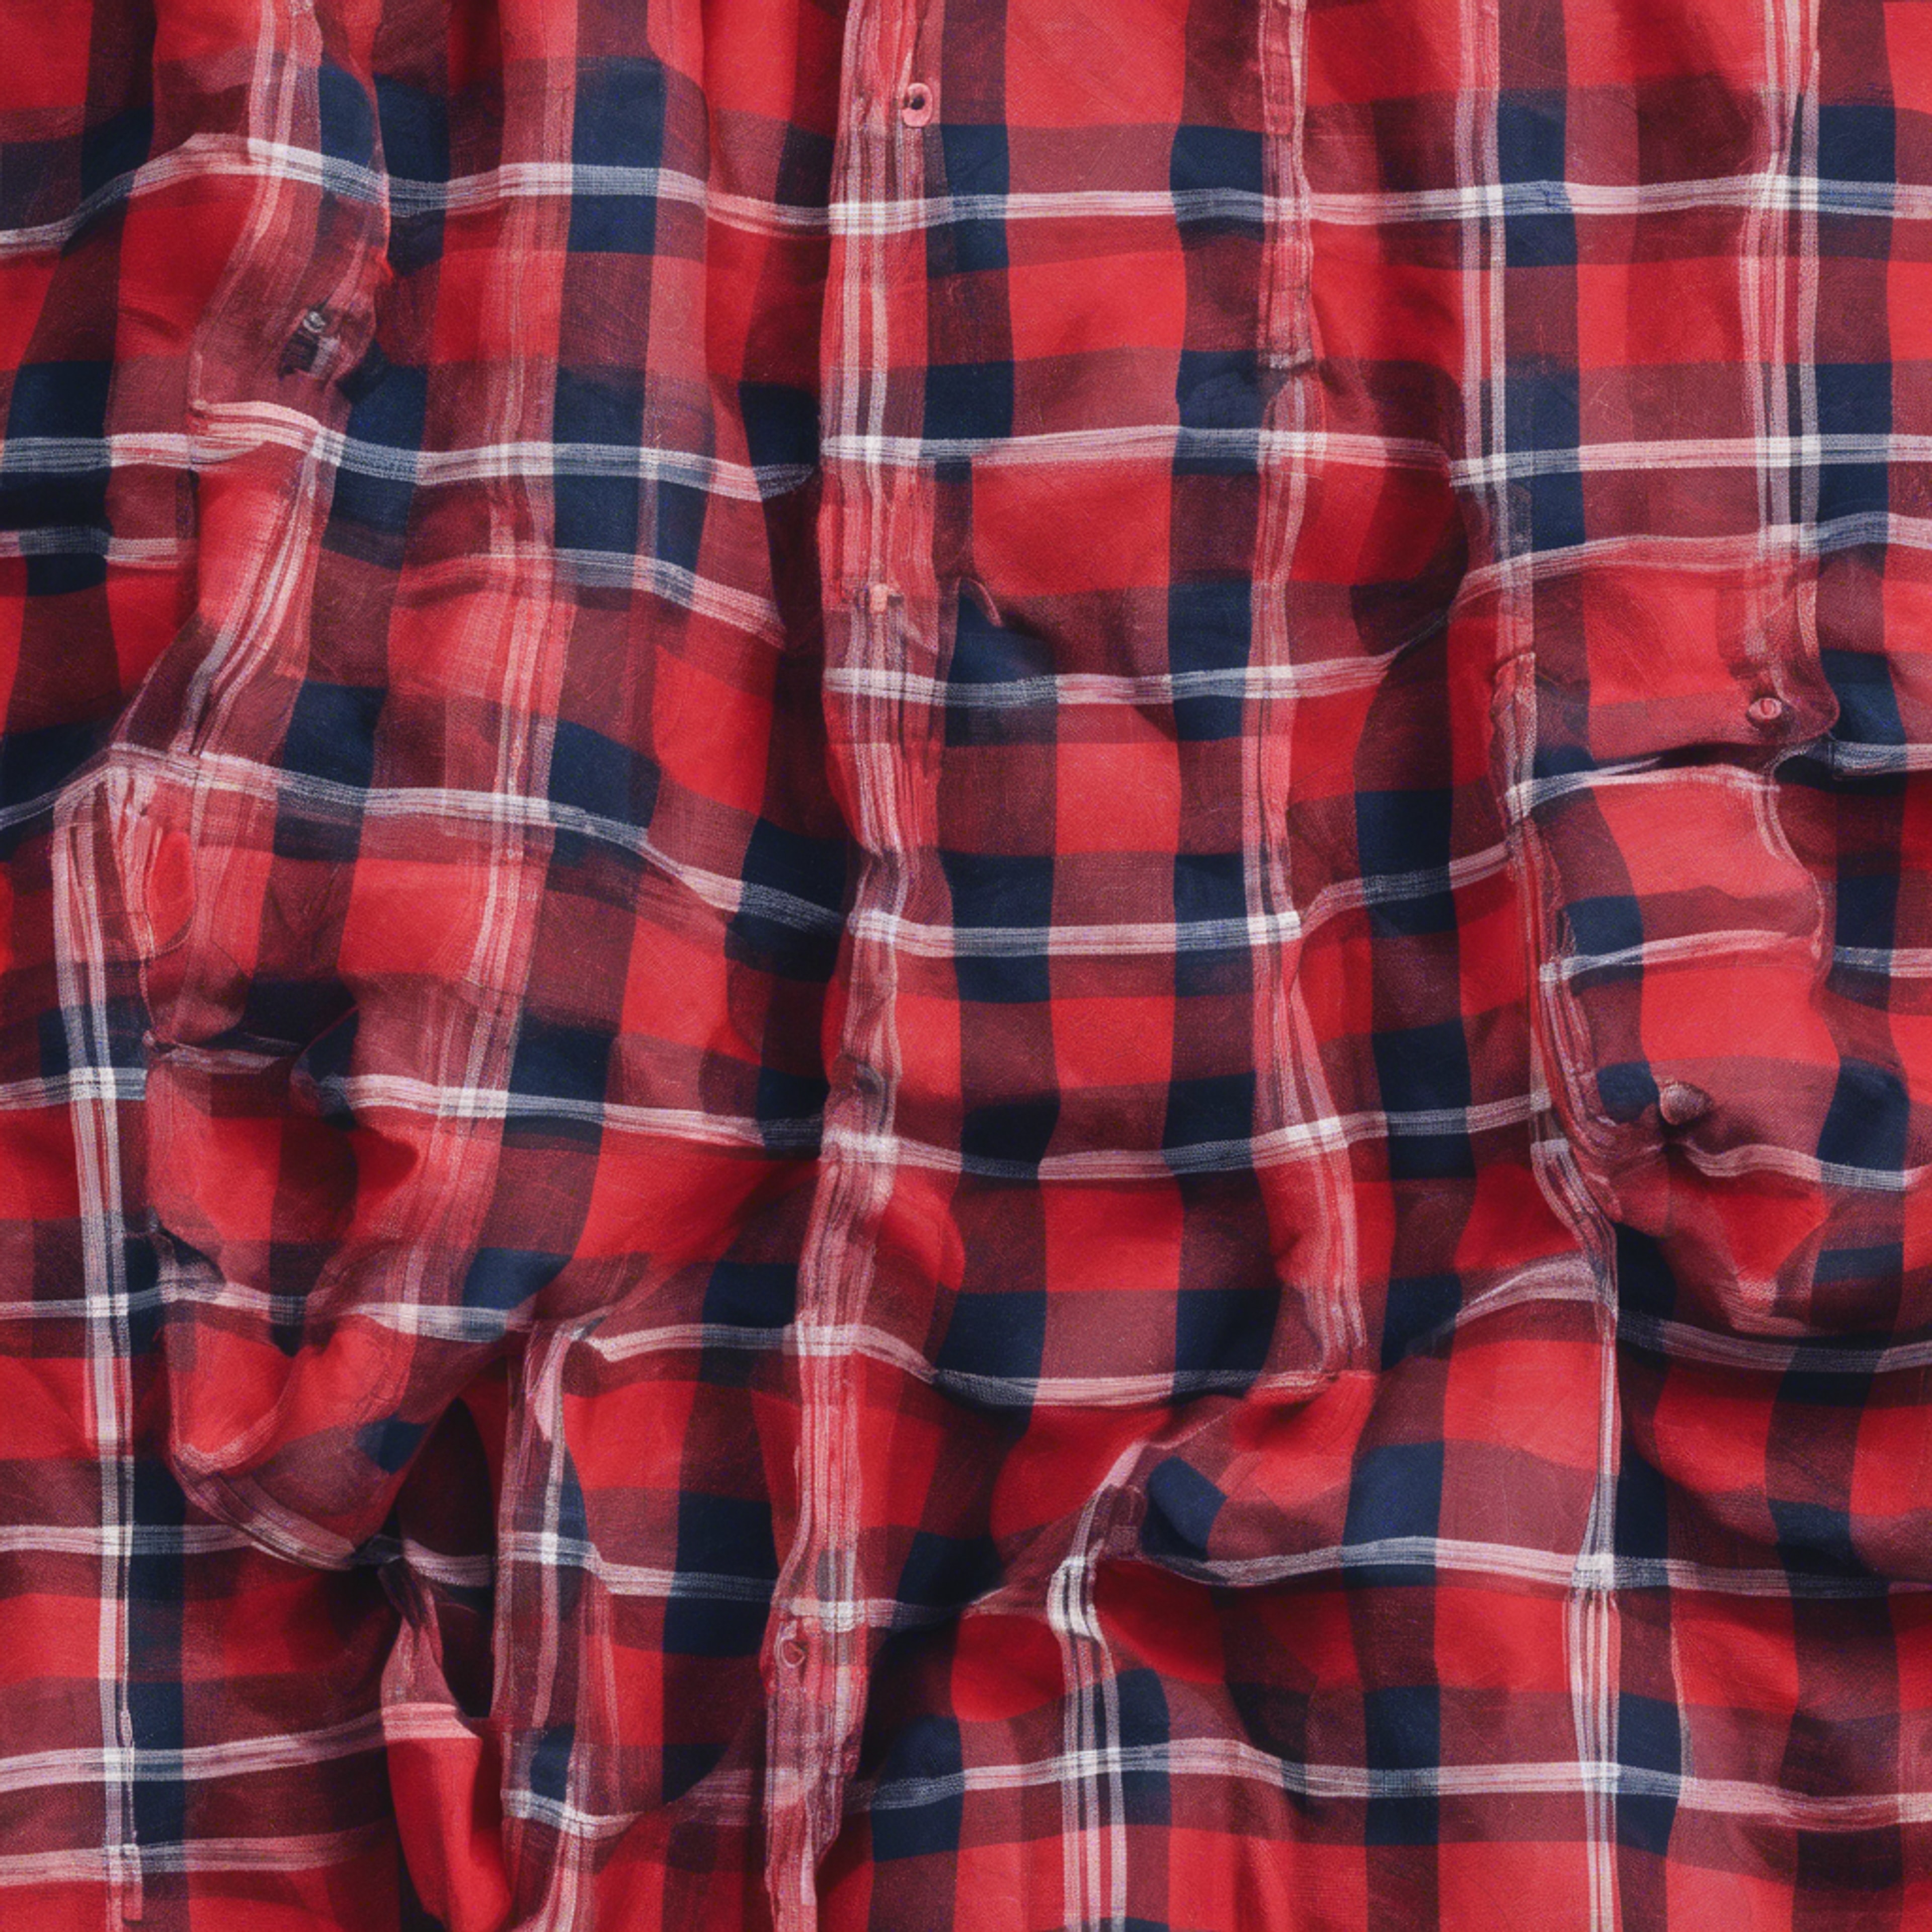 Red and navy checkered pattern resembling a flannel shirt texture. Wallpaper[9f4105365011412ba9d6]